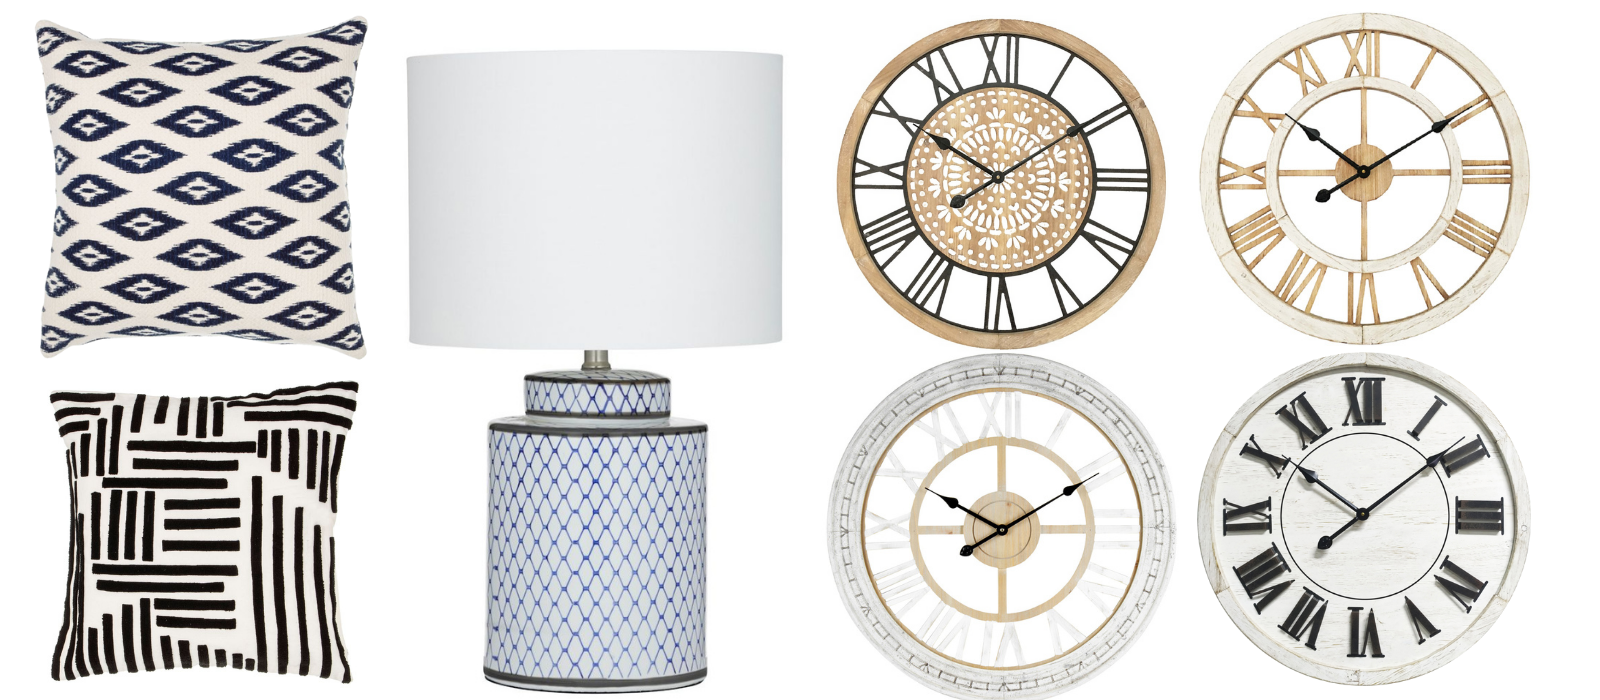 Hamptons Home Decor Cushions, Clocks and Lamps to style a Hamptons Home